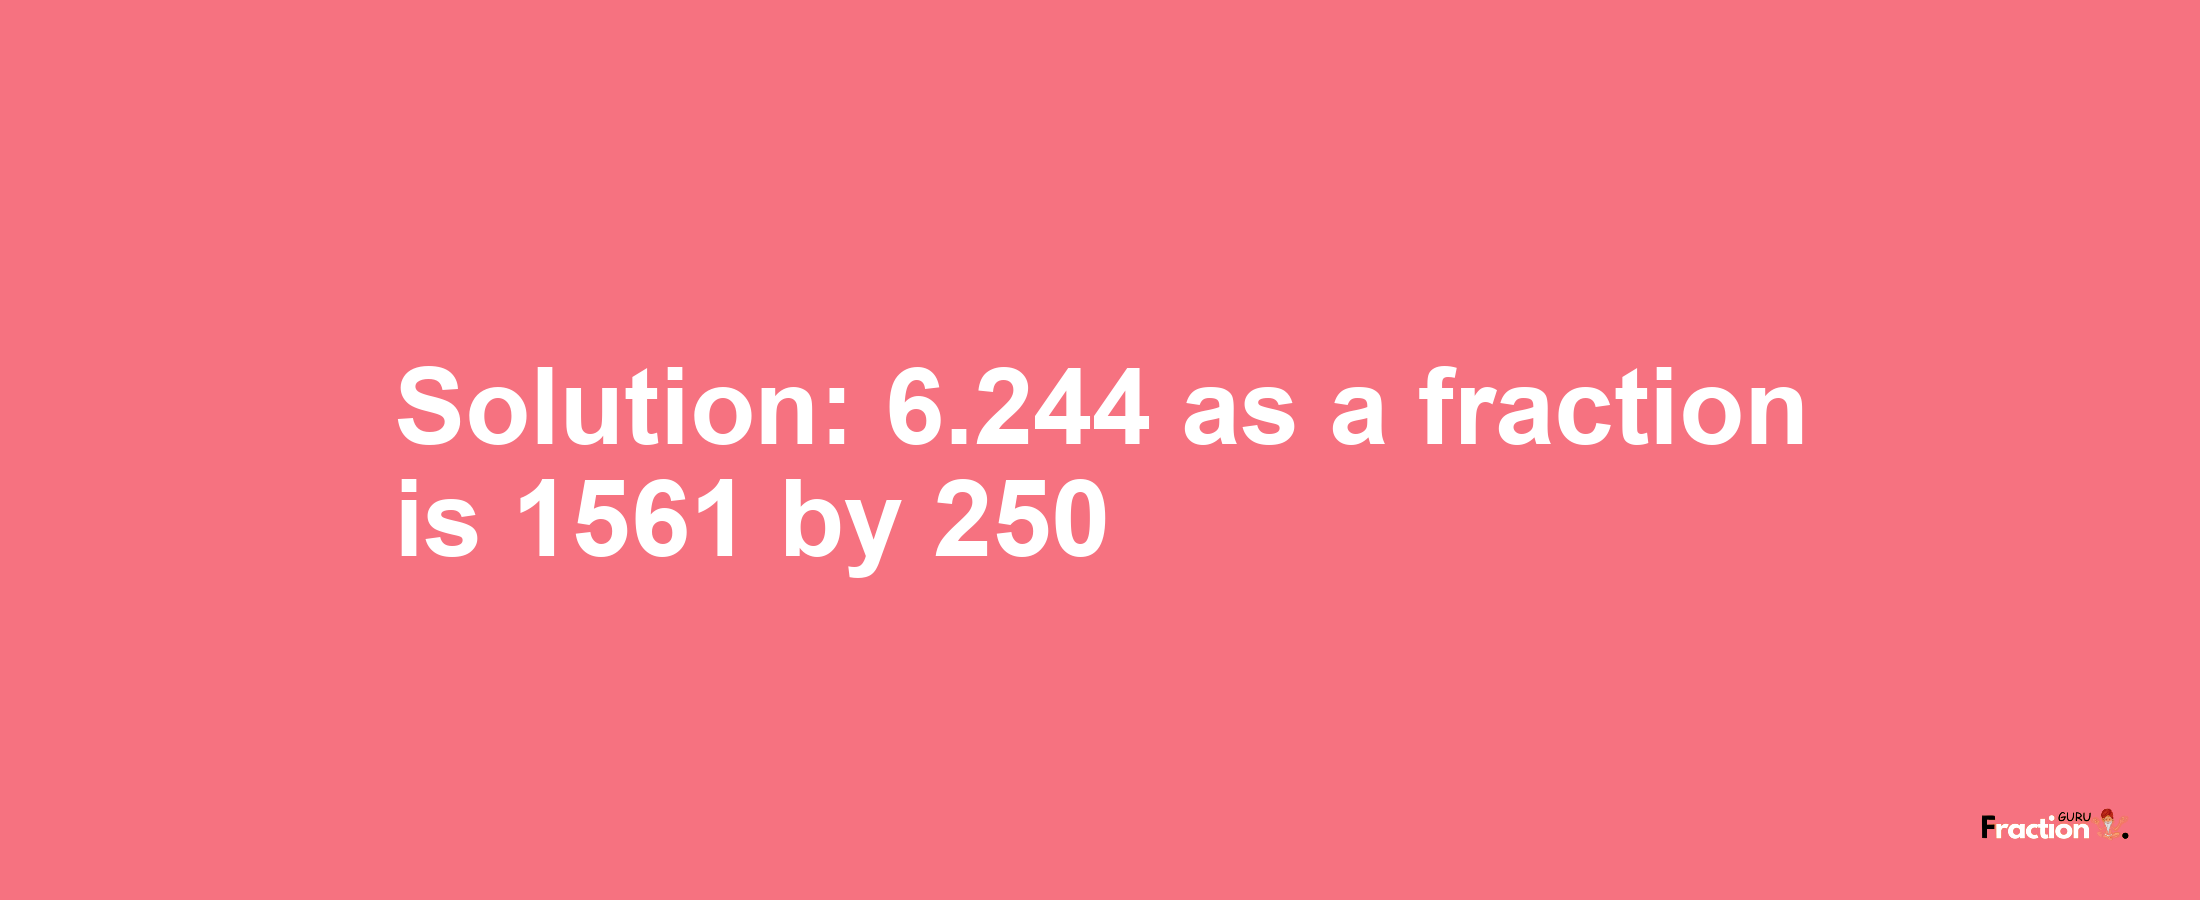 Solution:6.244 as a fraction is 1561/250